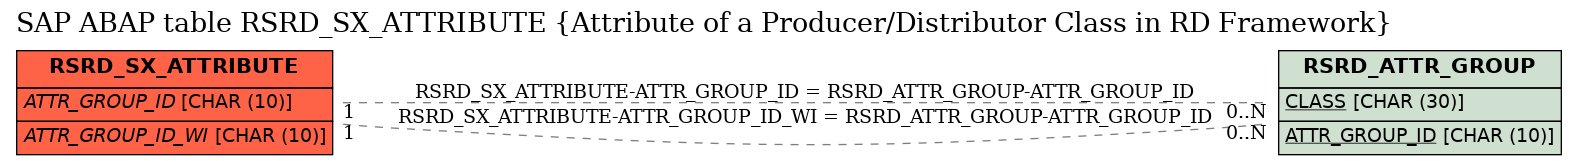 E-R Diagram for table RSRD_SX_ATTRIBUTE (Attribute of a Producer/Distributor Class in RD Framework)